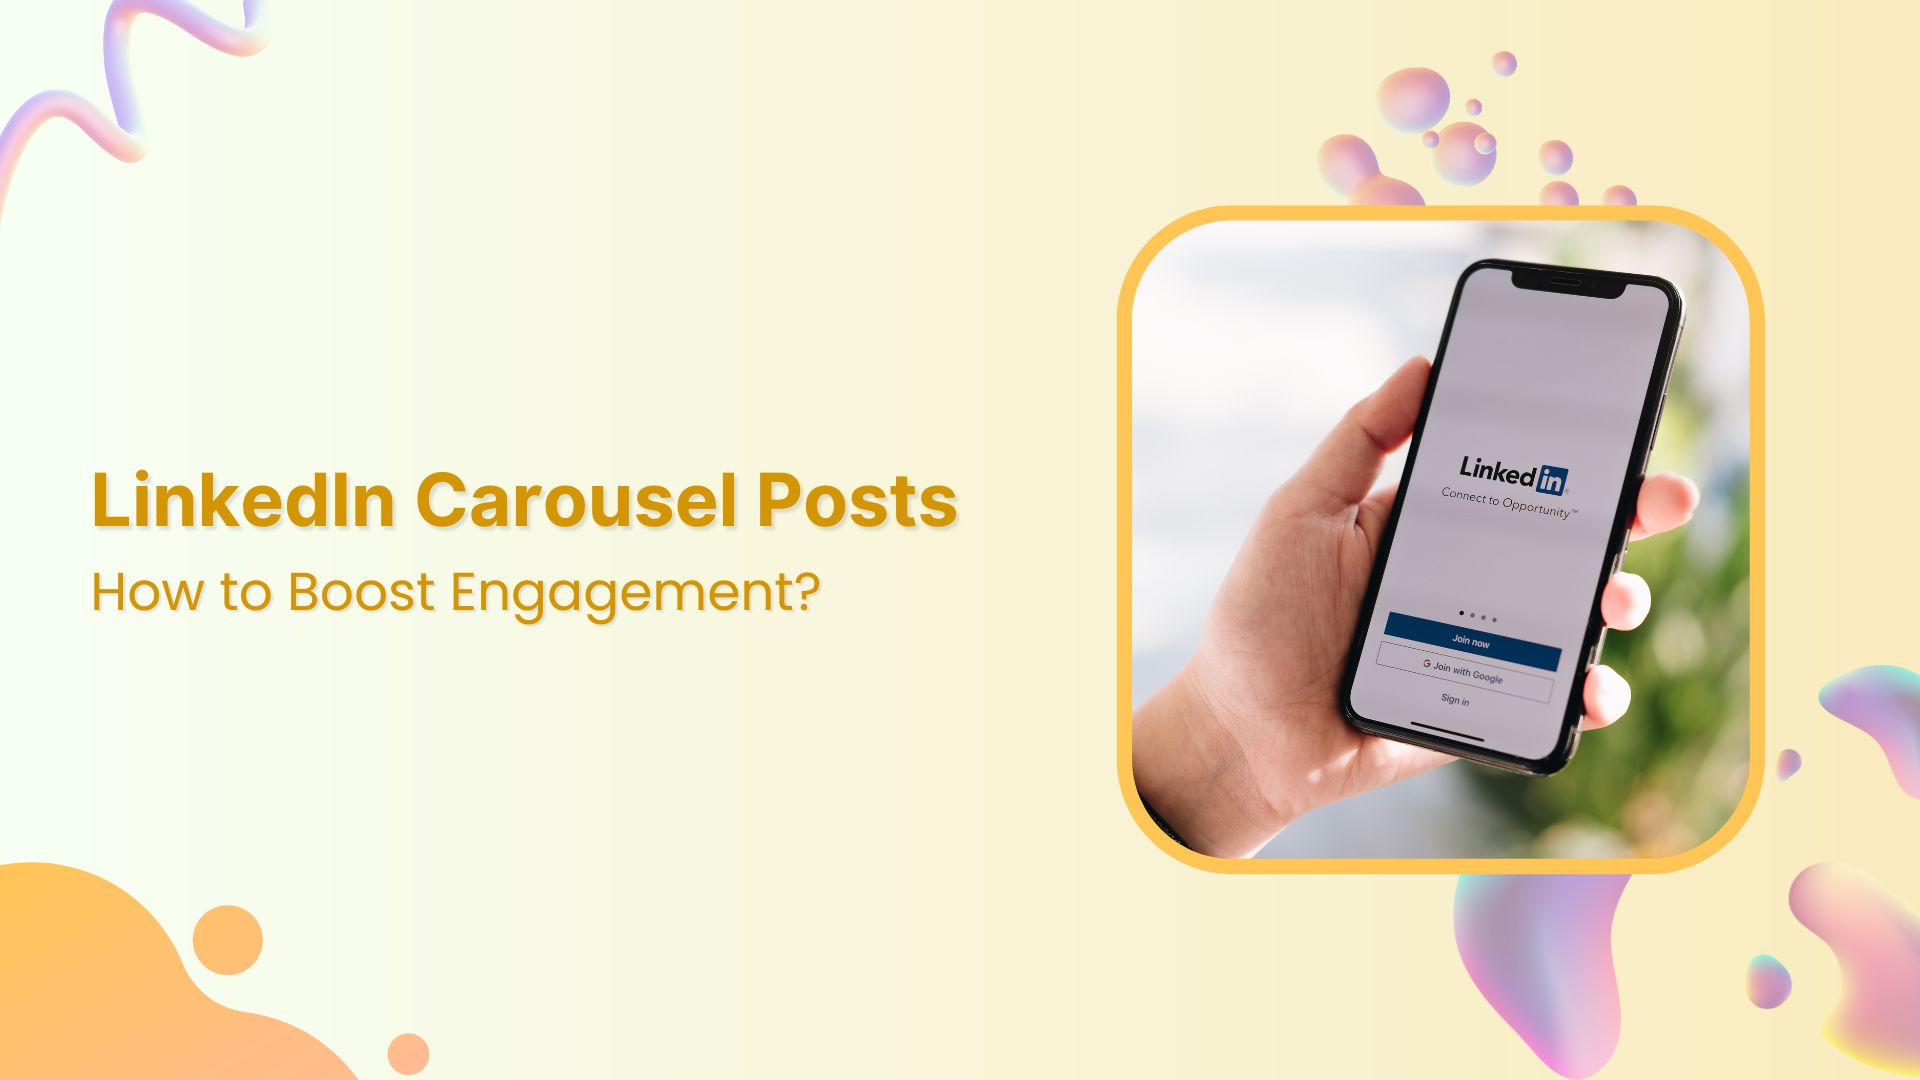 LinkedIn Carousel Posts: How to Boost Engagement?